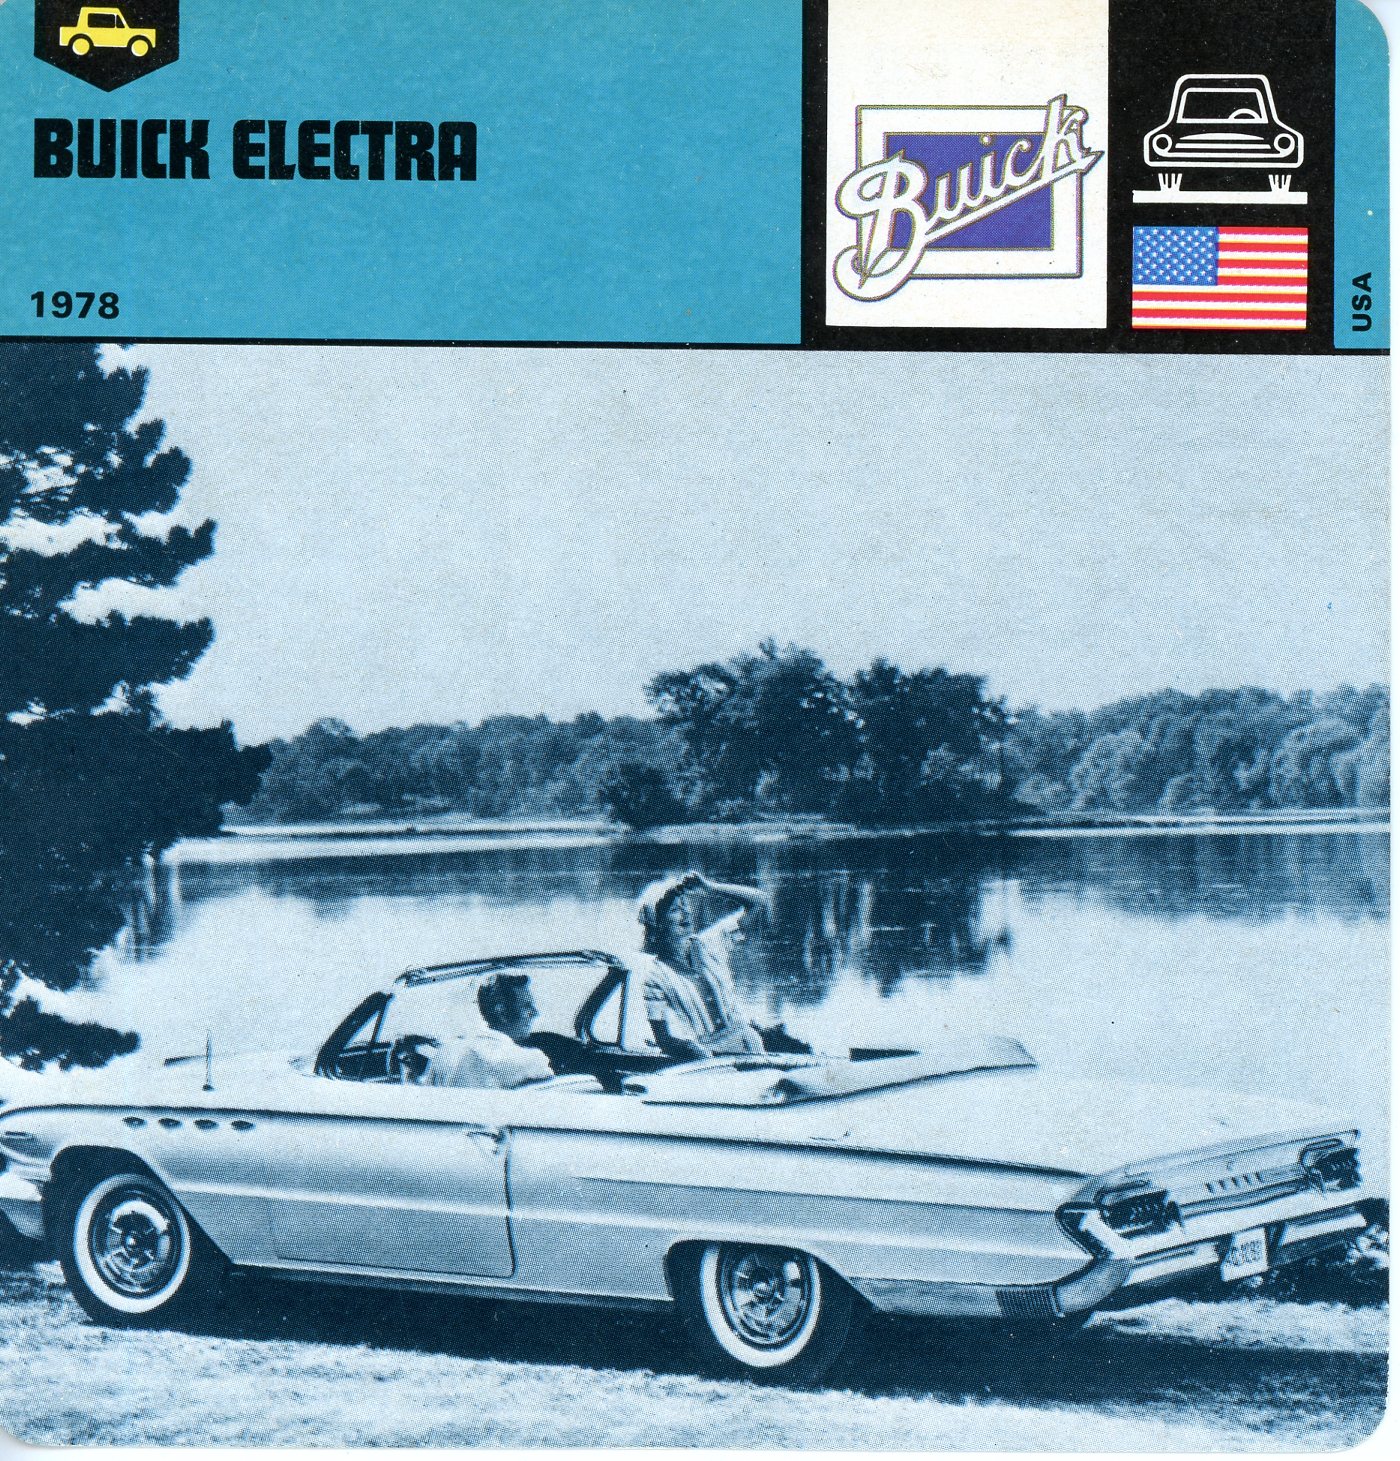 FICHE BUICK ELECTRA CARS-CARD LEMASTERBROCKERS